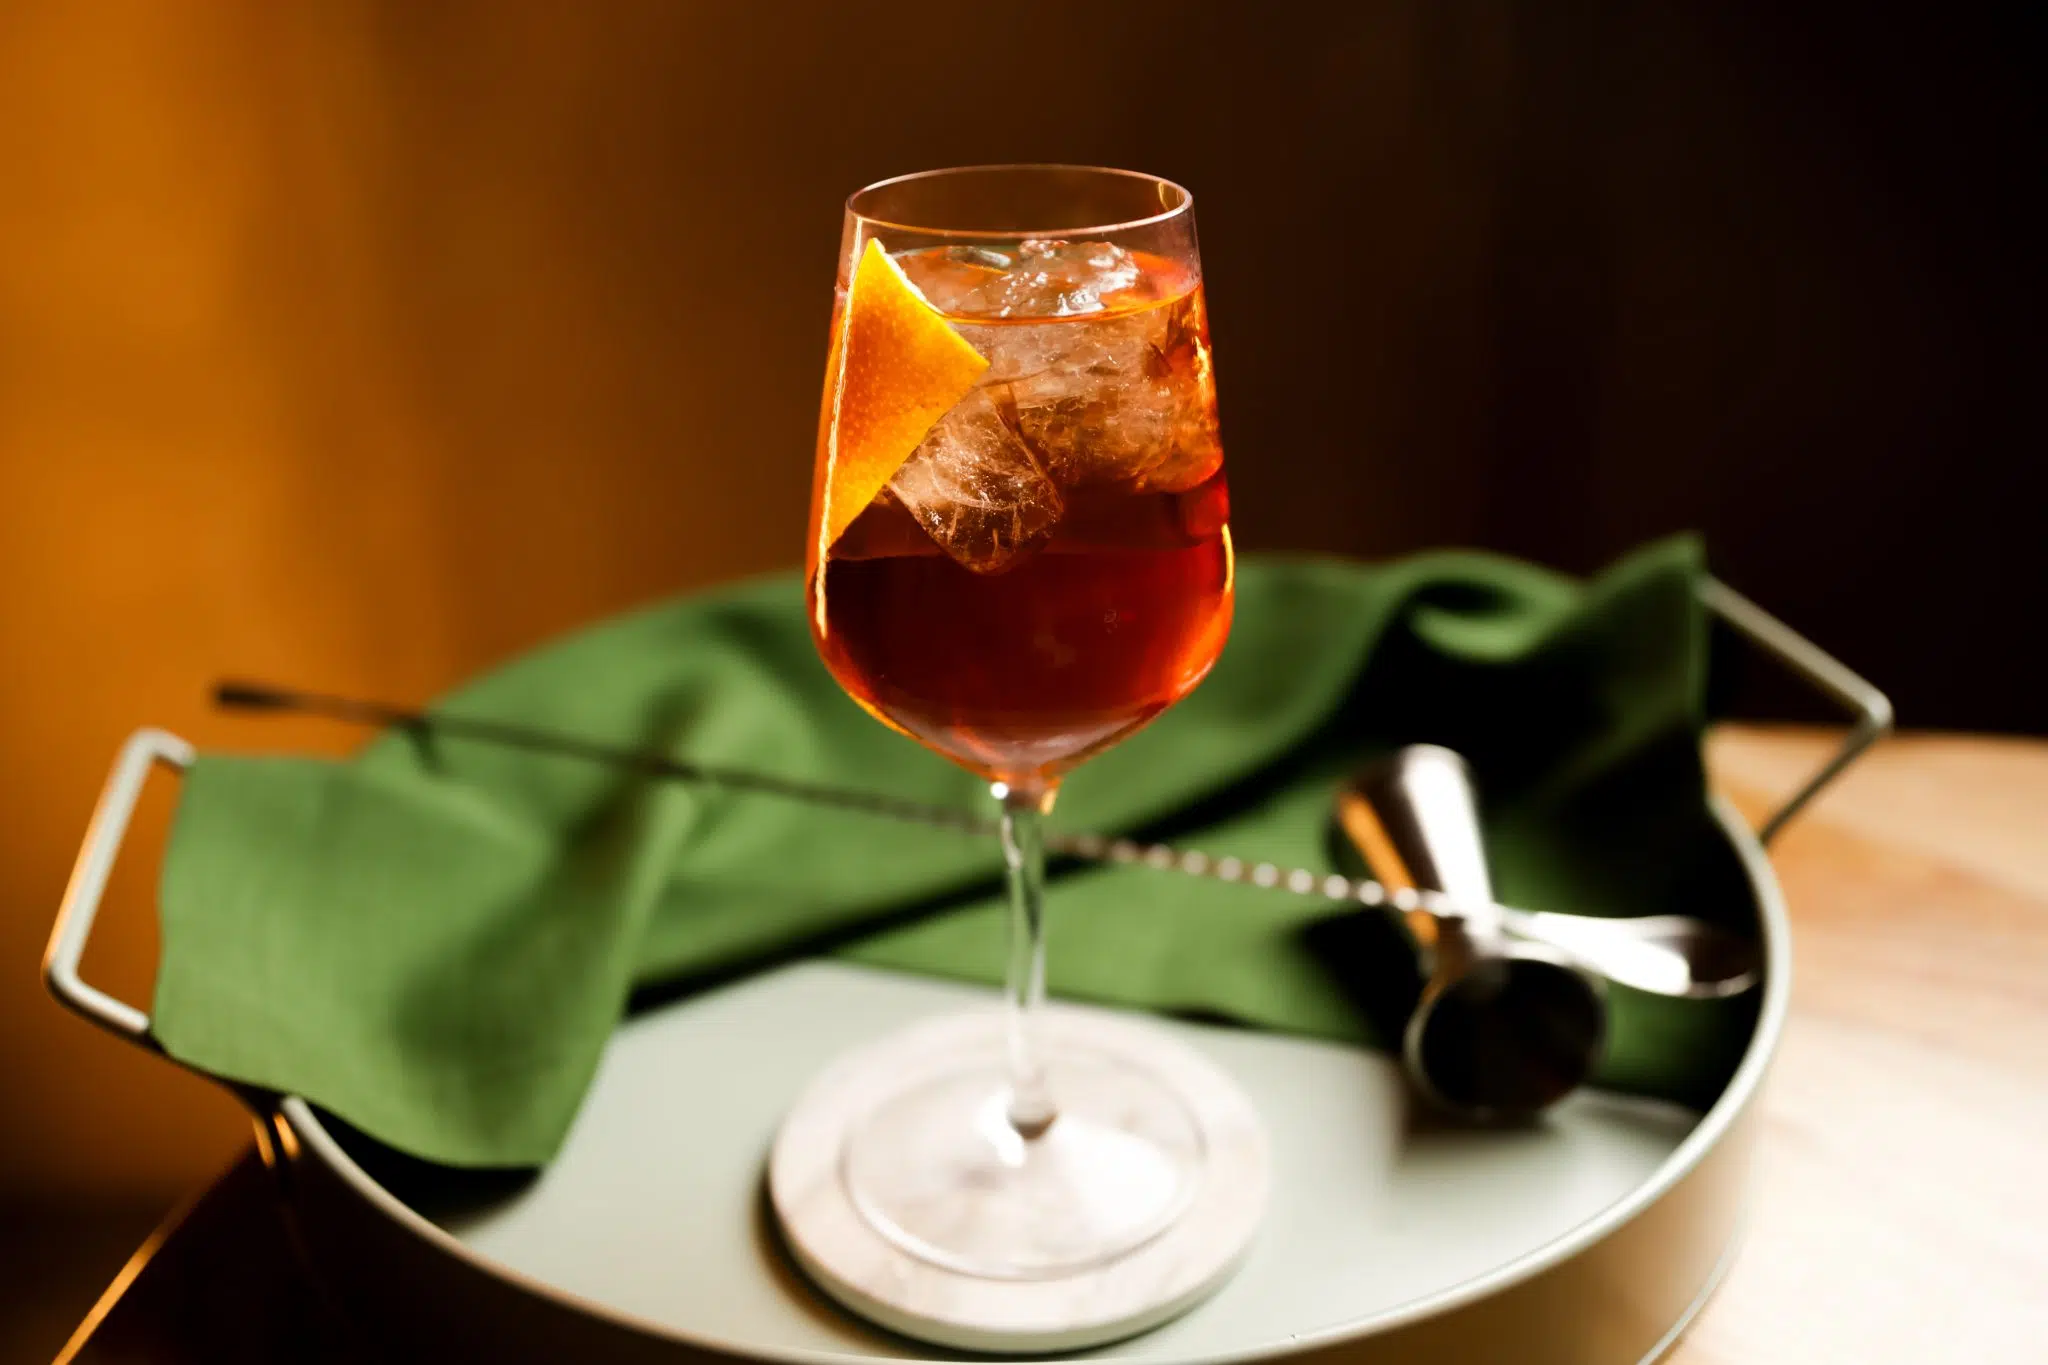 A side shot of a Rosé Aperol Spritz cocktail in a wine glass on a white coaster surrounded by a jigger, a bar spoon and a green cloth